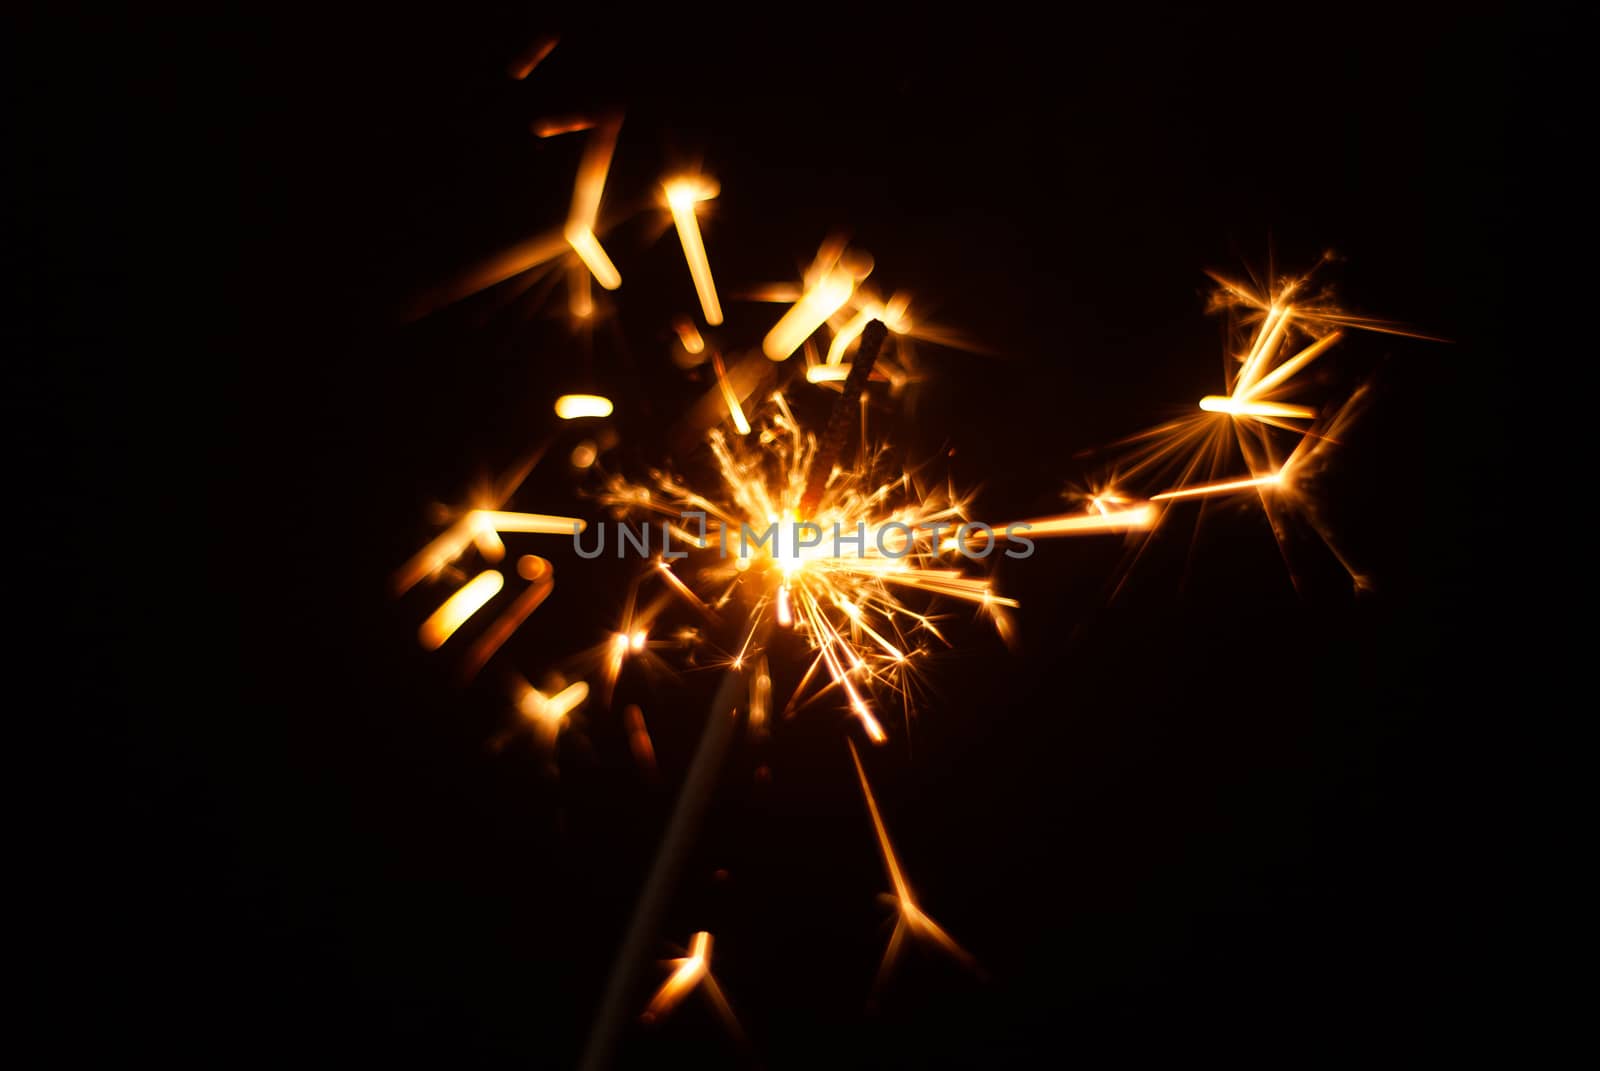 Sparkler on a black background, sparks fly in different directions, Christmas atmosphere